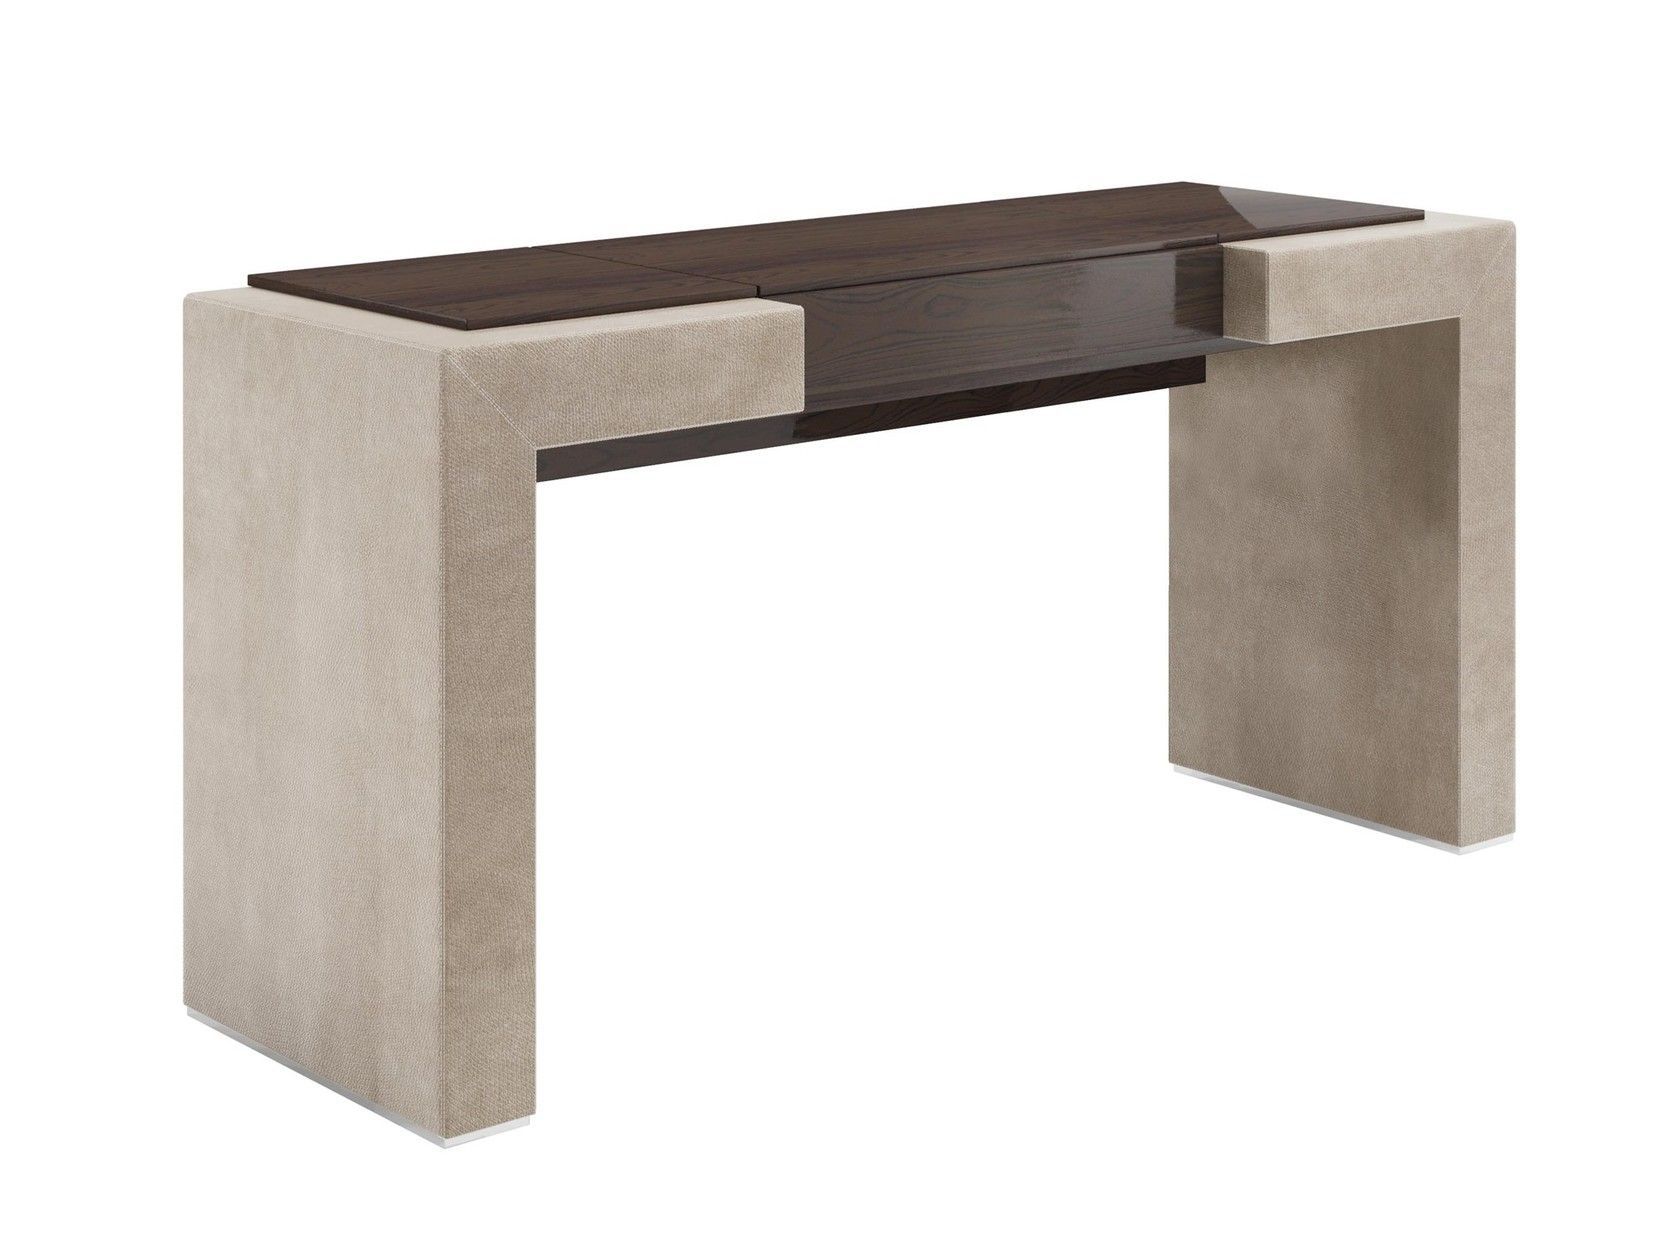 Rectangular Solid Wood Console Table With Drawers Kandy Intended For Wood Rectangular Console Tables (View 18 of 20)